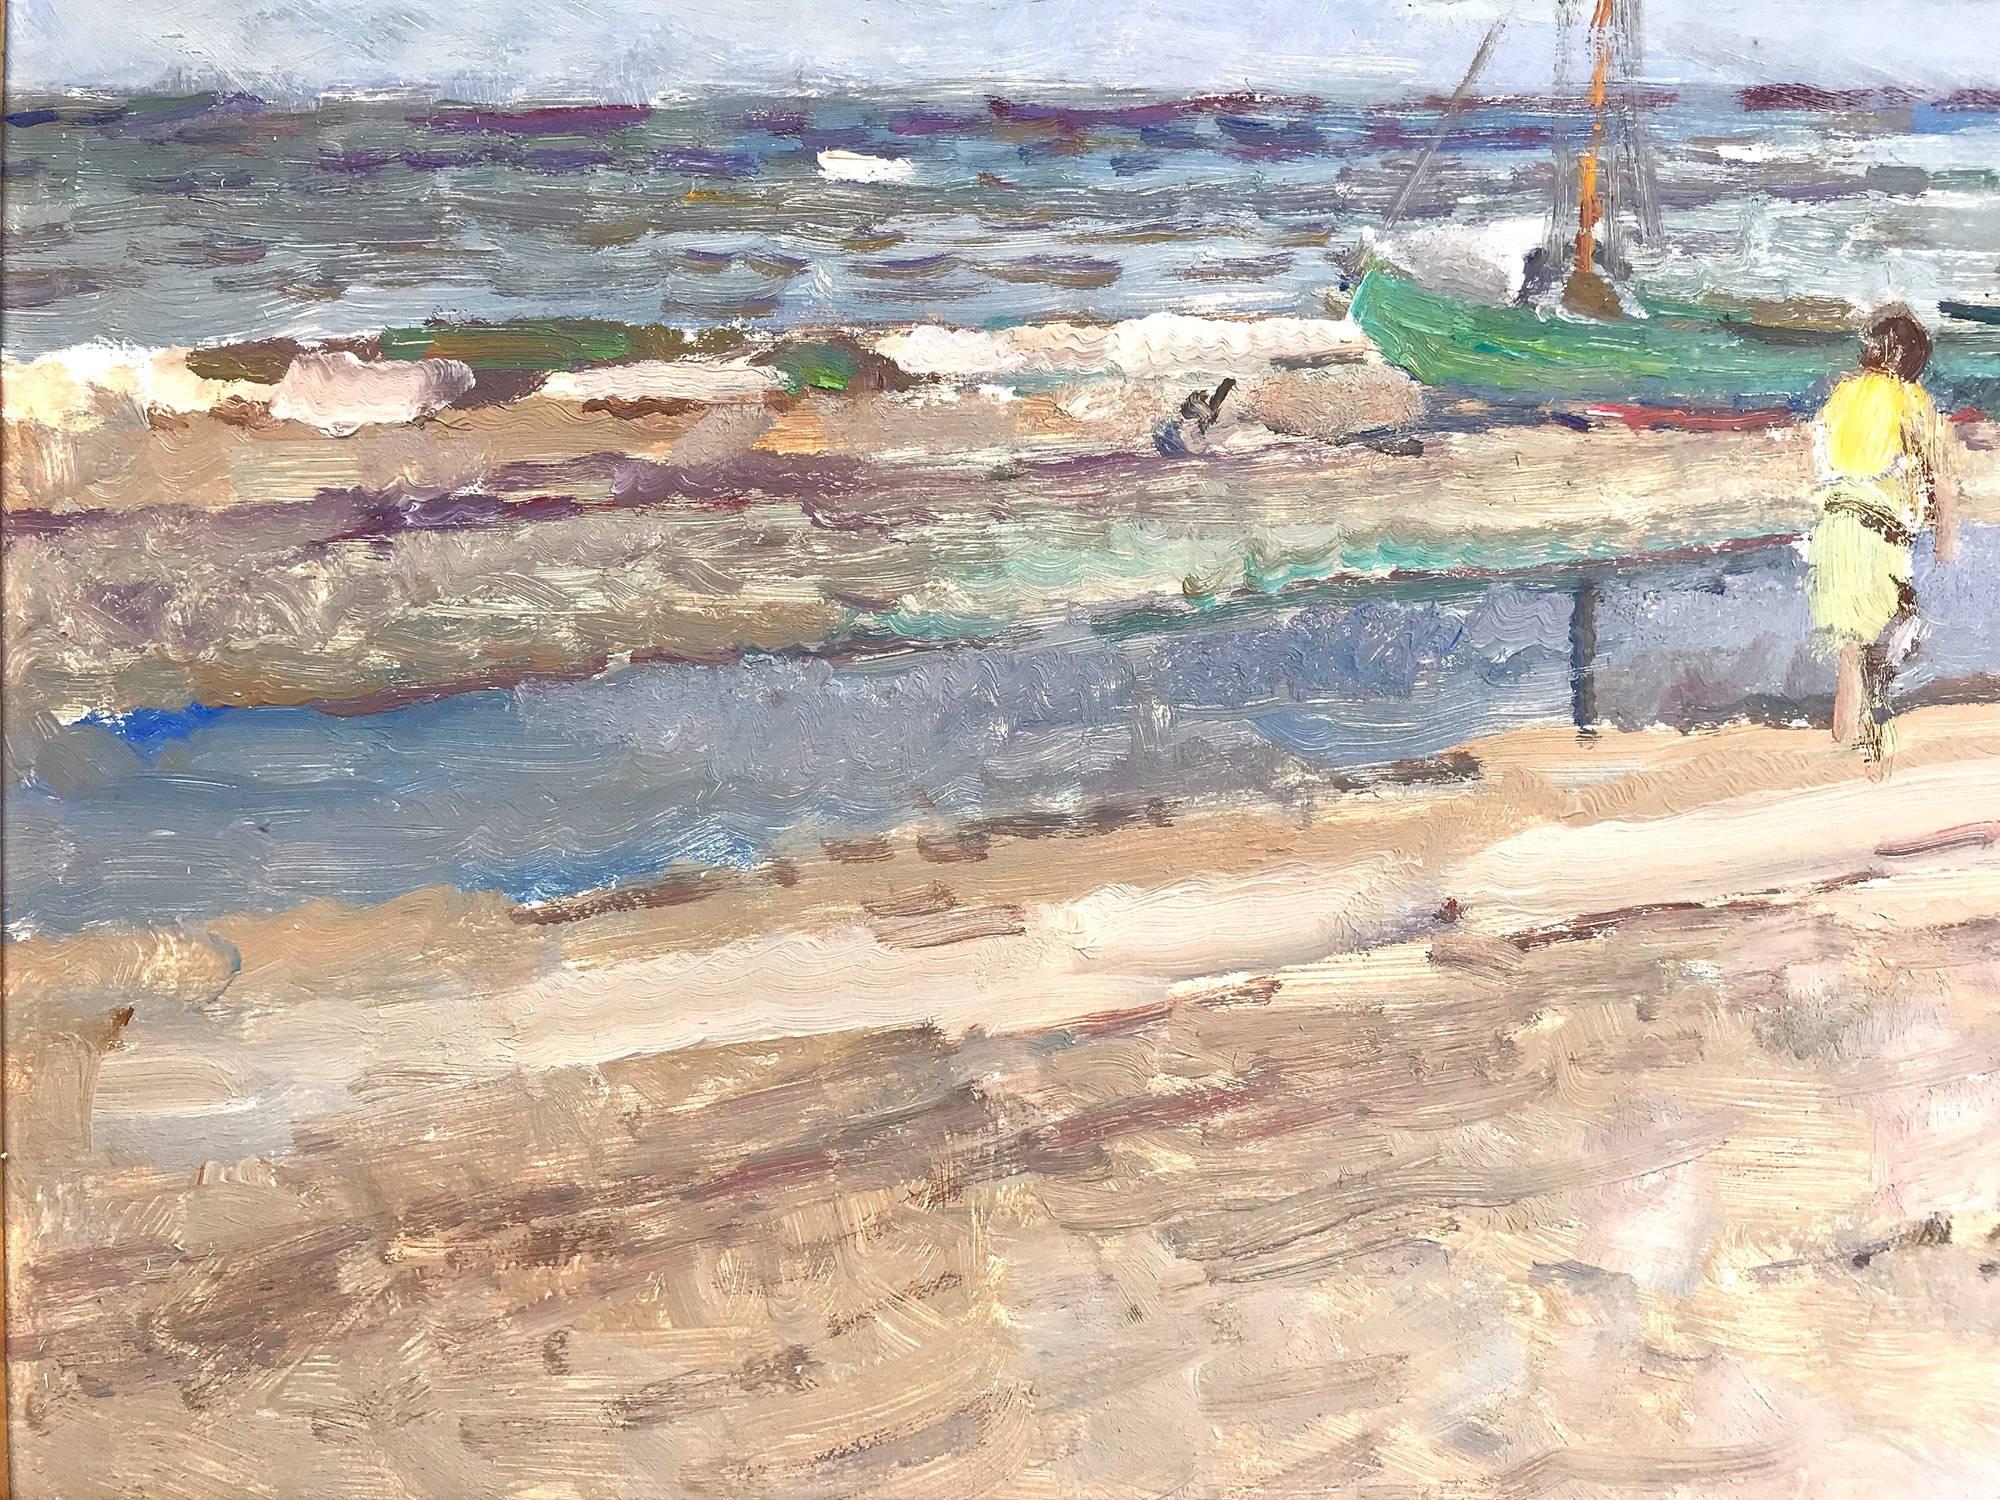 A wonderfully rich beach scene done in the Mid-20th Century depicting figures in the sand with sailing boats in the distance. The impressionist details are greatly admired as Arie van Noort is considered one of the last representative of The Hague